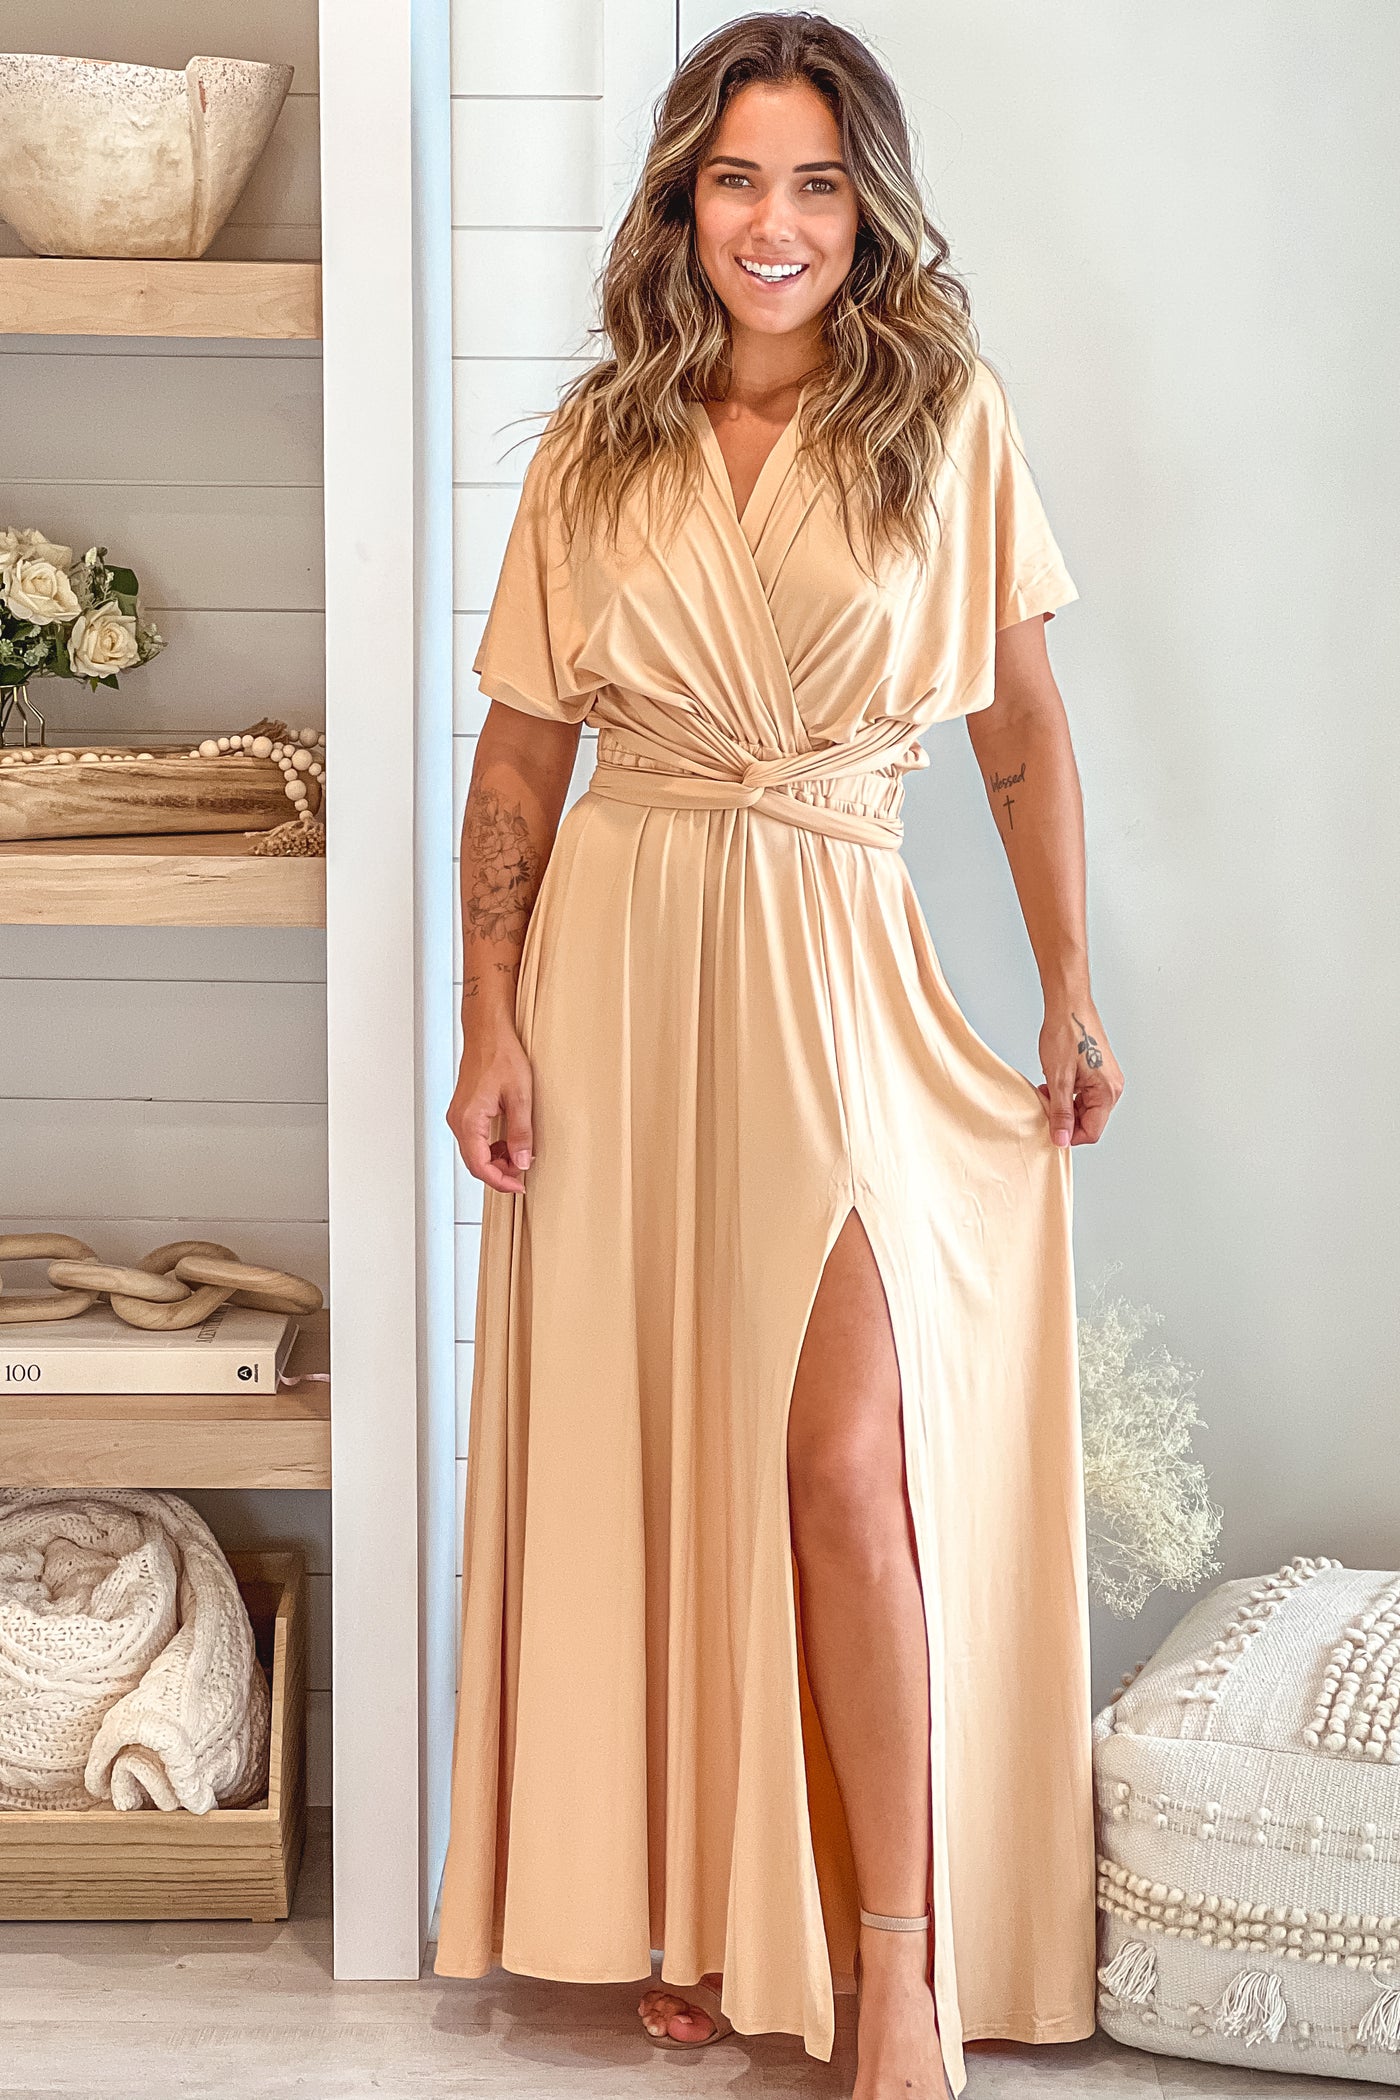 taupe multi tie maxi dress with slit